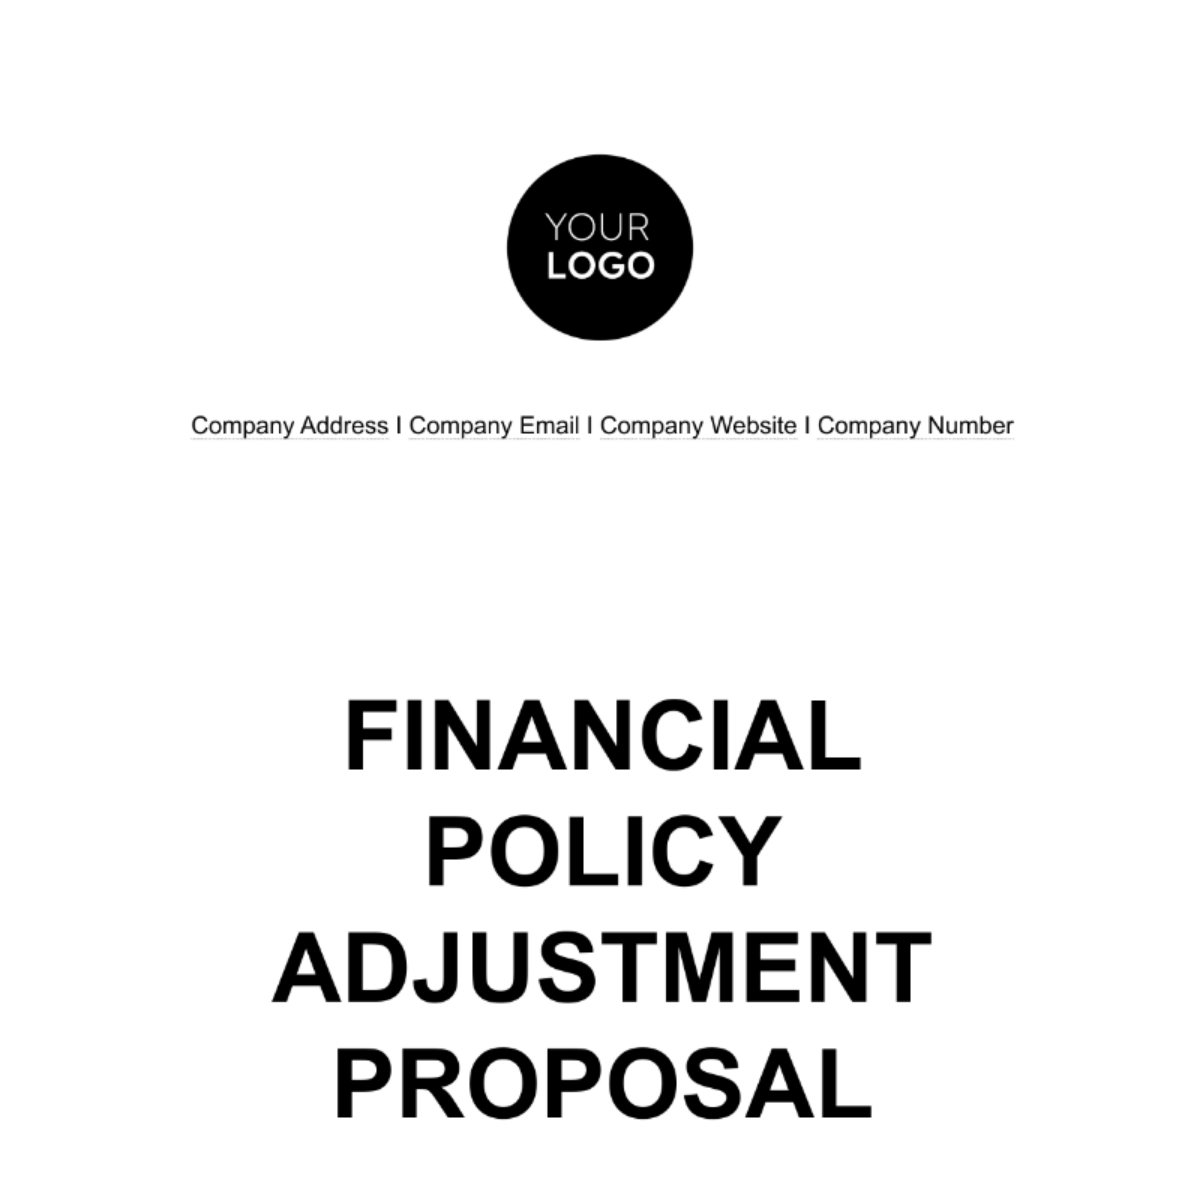 Free Financial Policy Adjustment Proposal Template